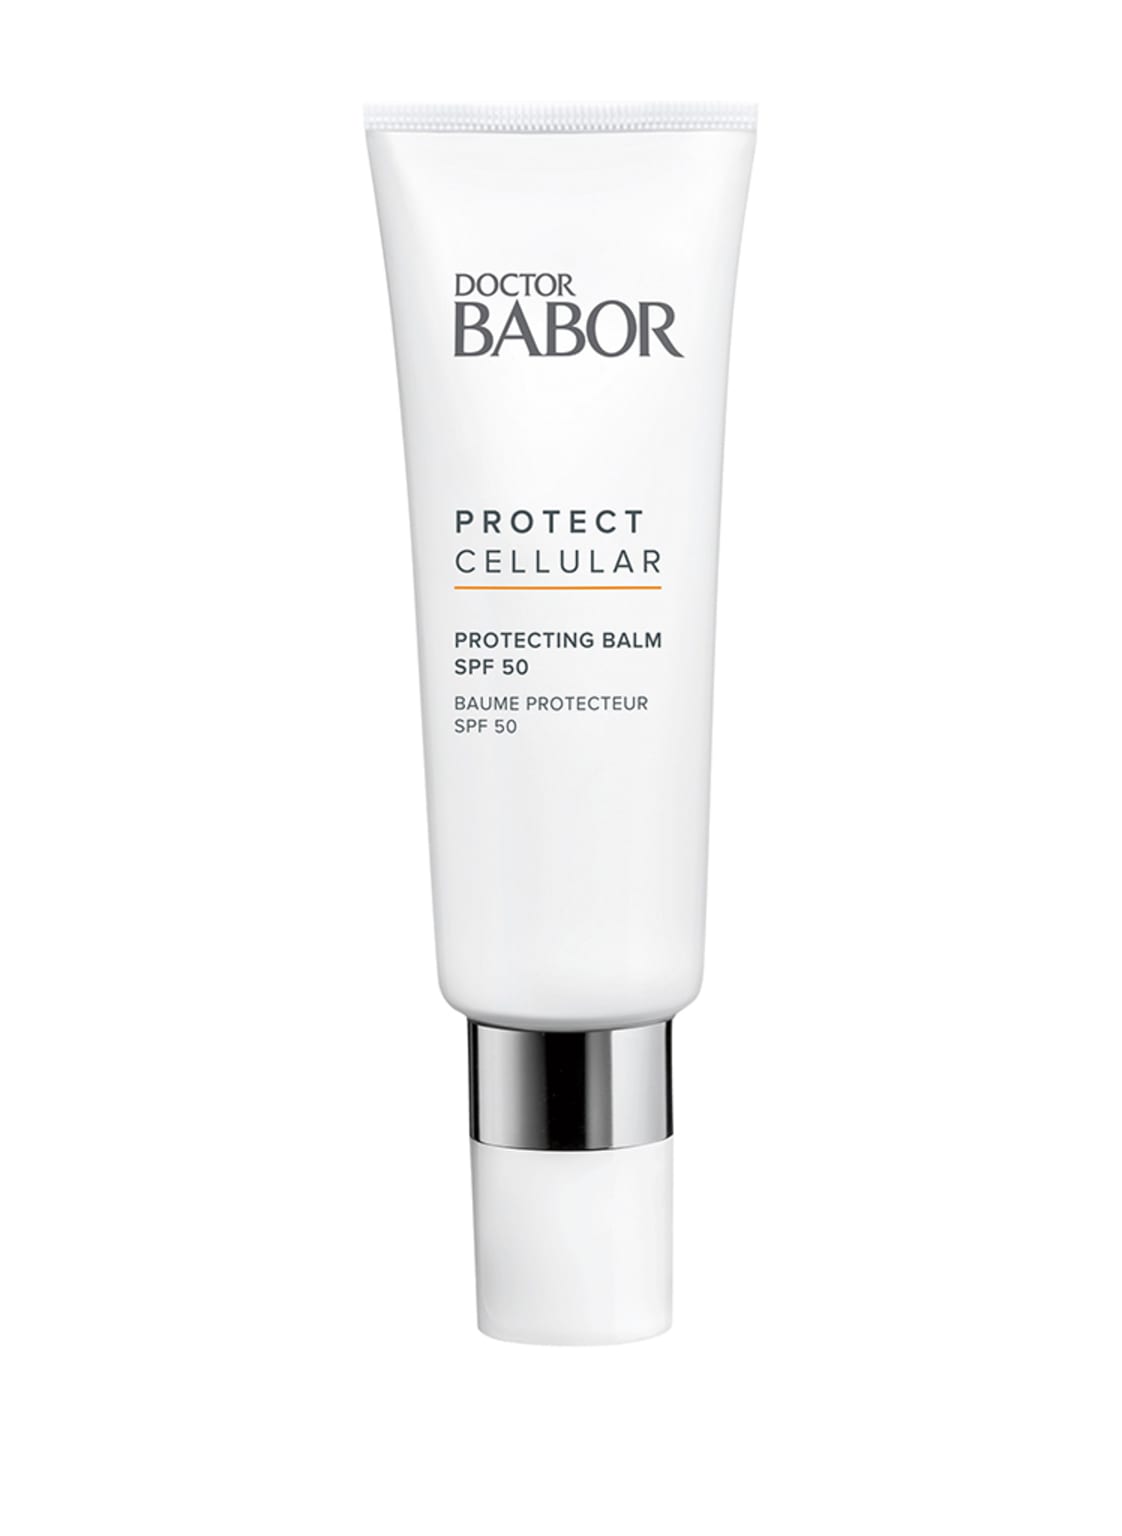 Image of Babor Doctor Babor Protect Cellular - Face Protecting Balm SPF 50 50 ml